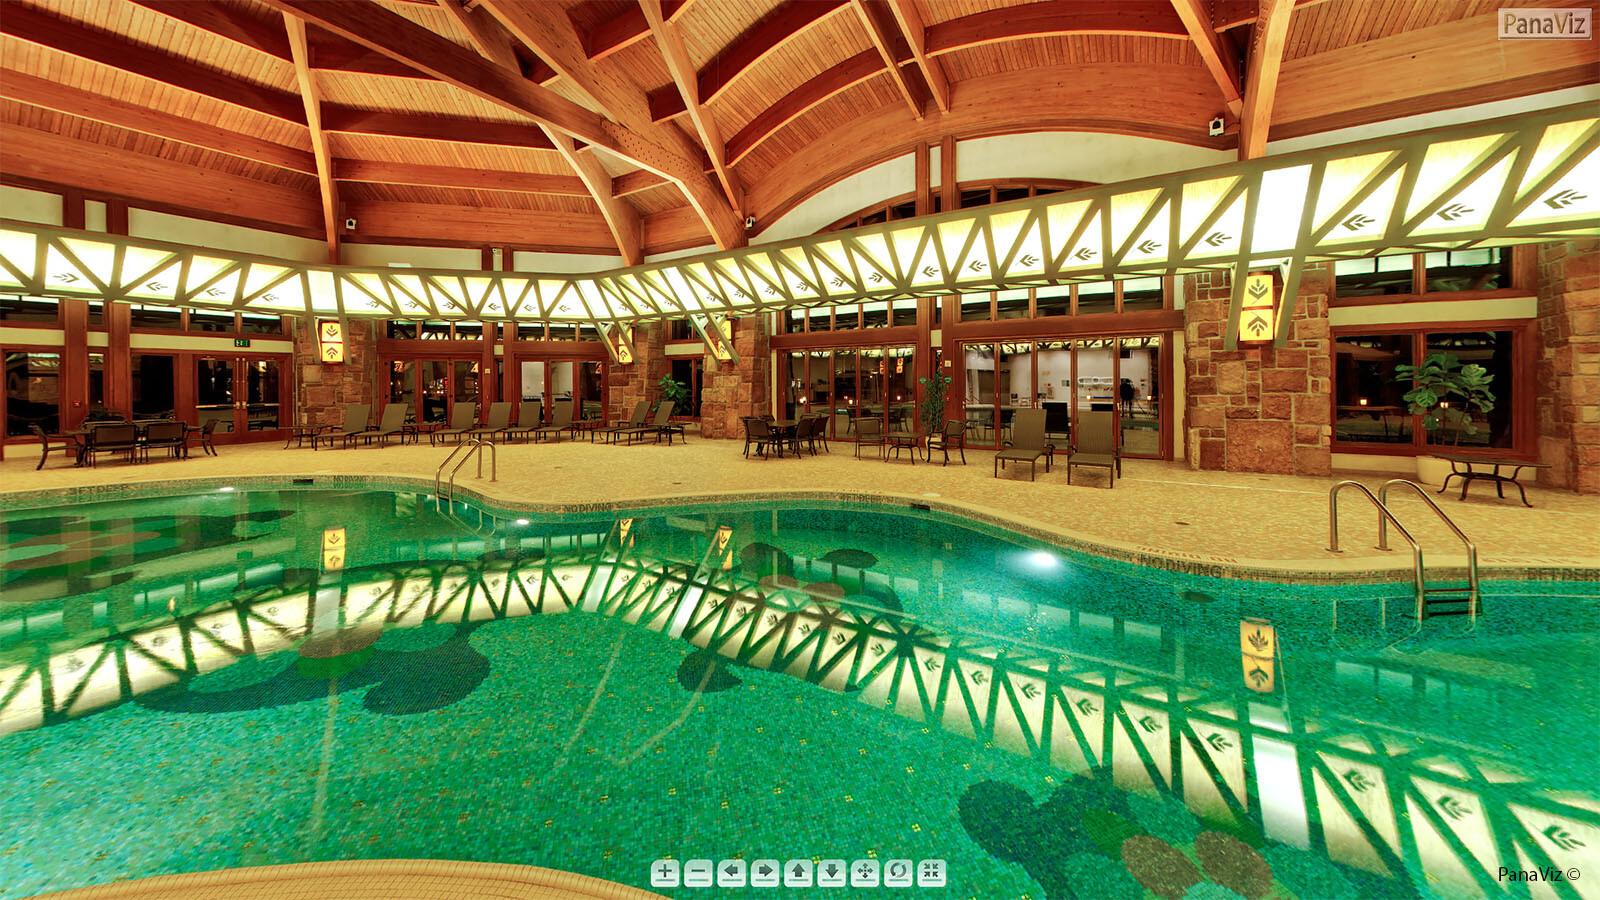 Click for 360 Virtual Tour of Casino Pool